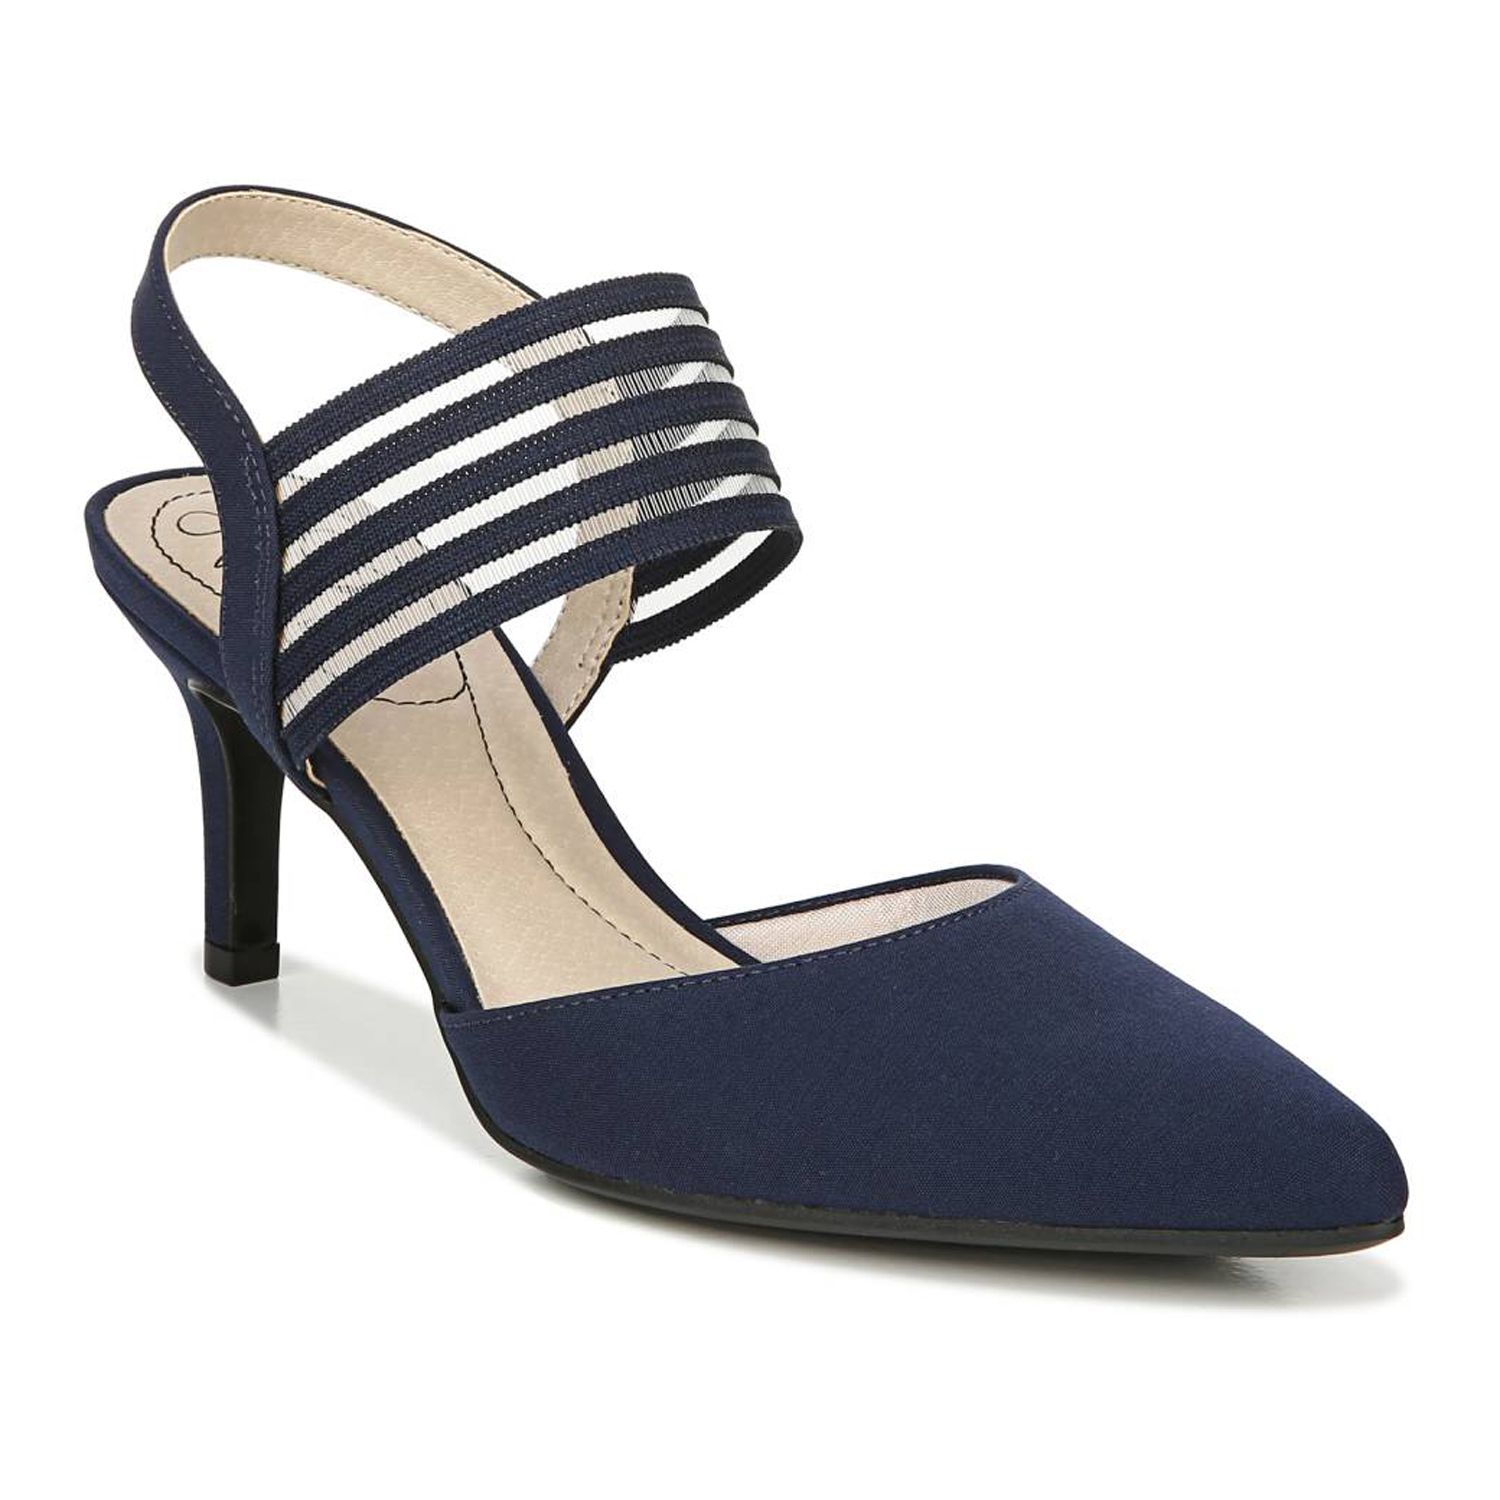 womens navy evening shoes